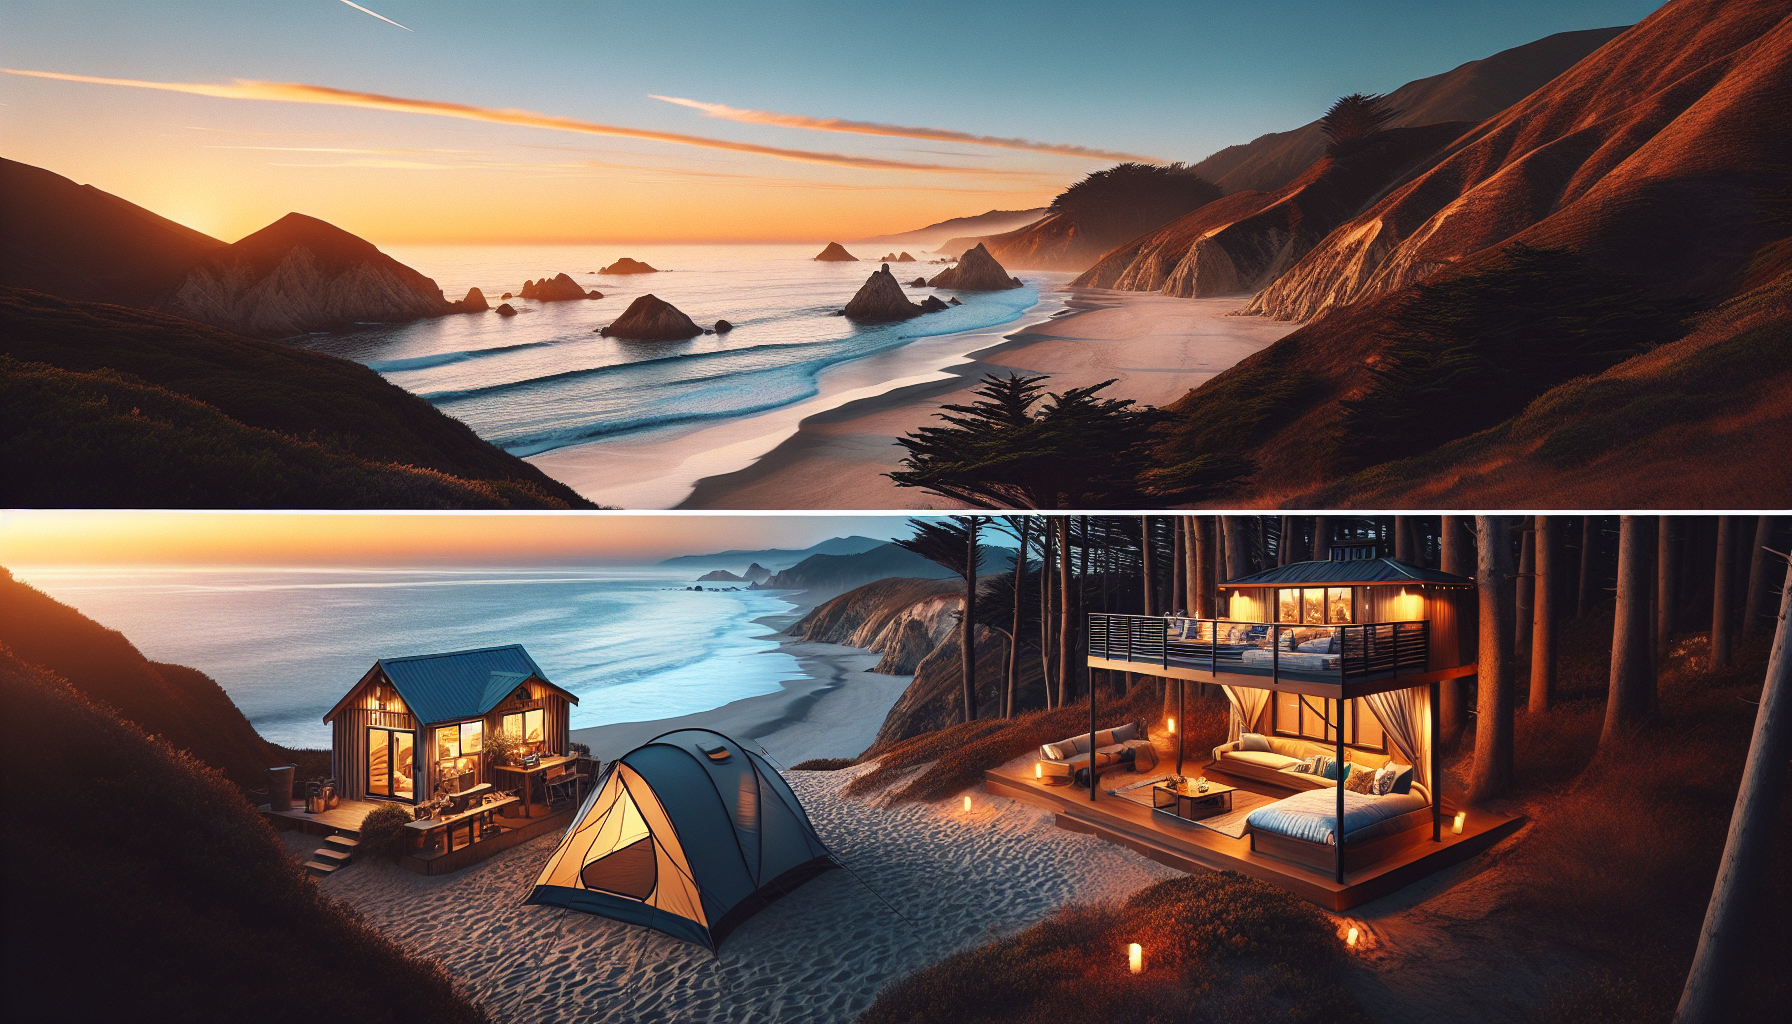 What Are The Options For Beachside Camping Or Glamping Experiences?